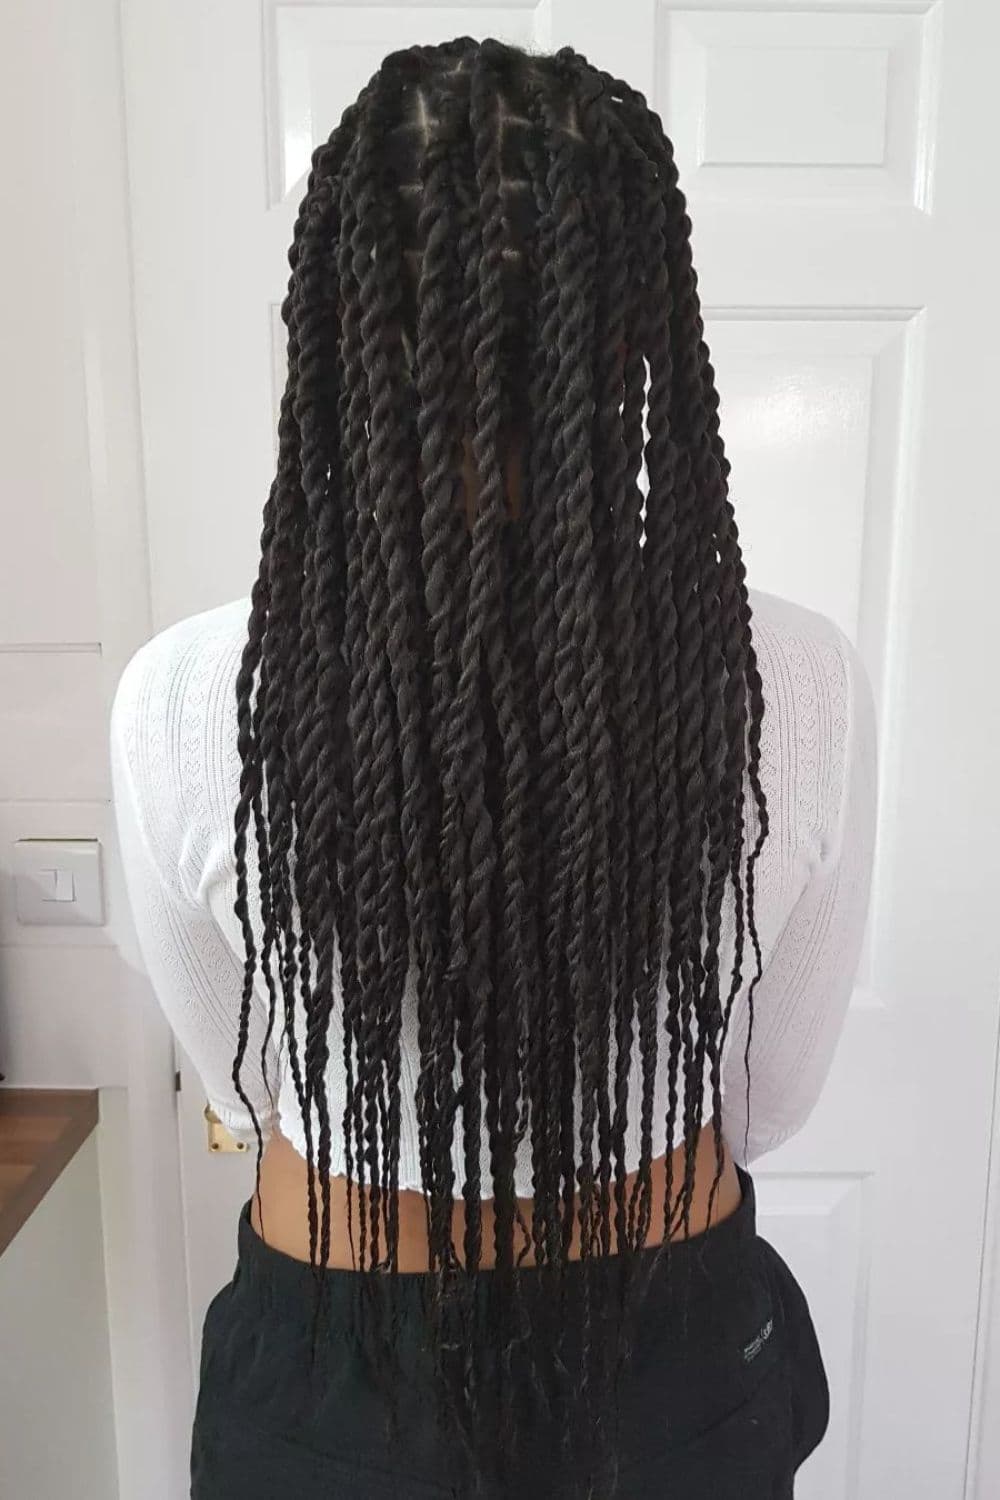 A woman with black box twists hairstyle.